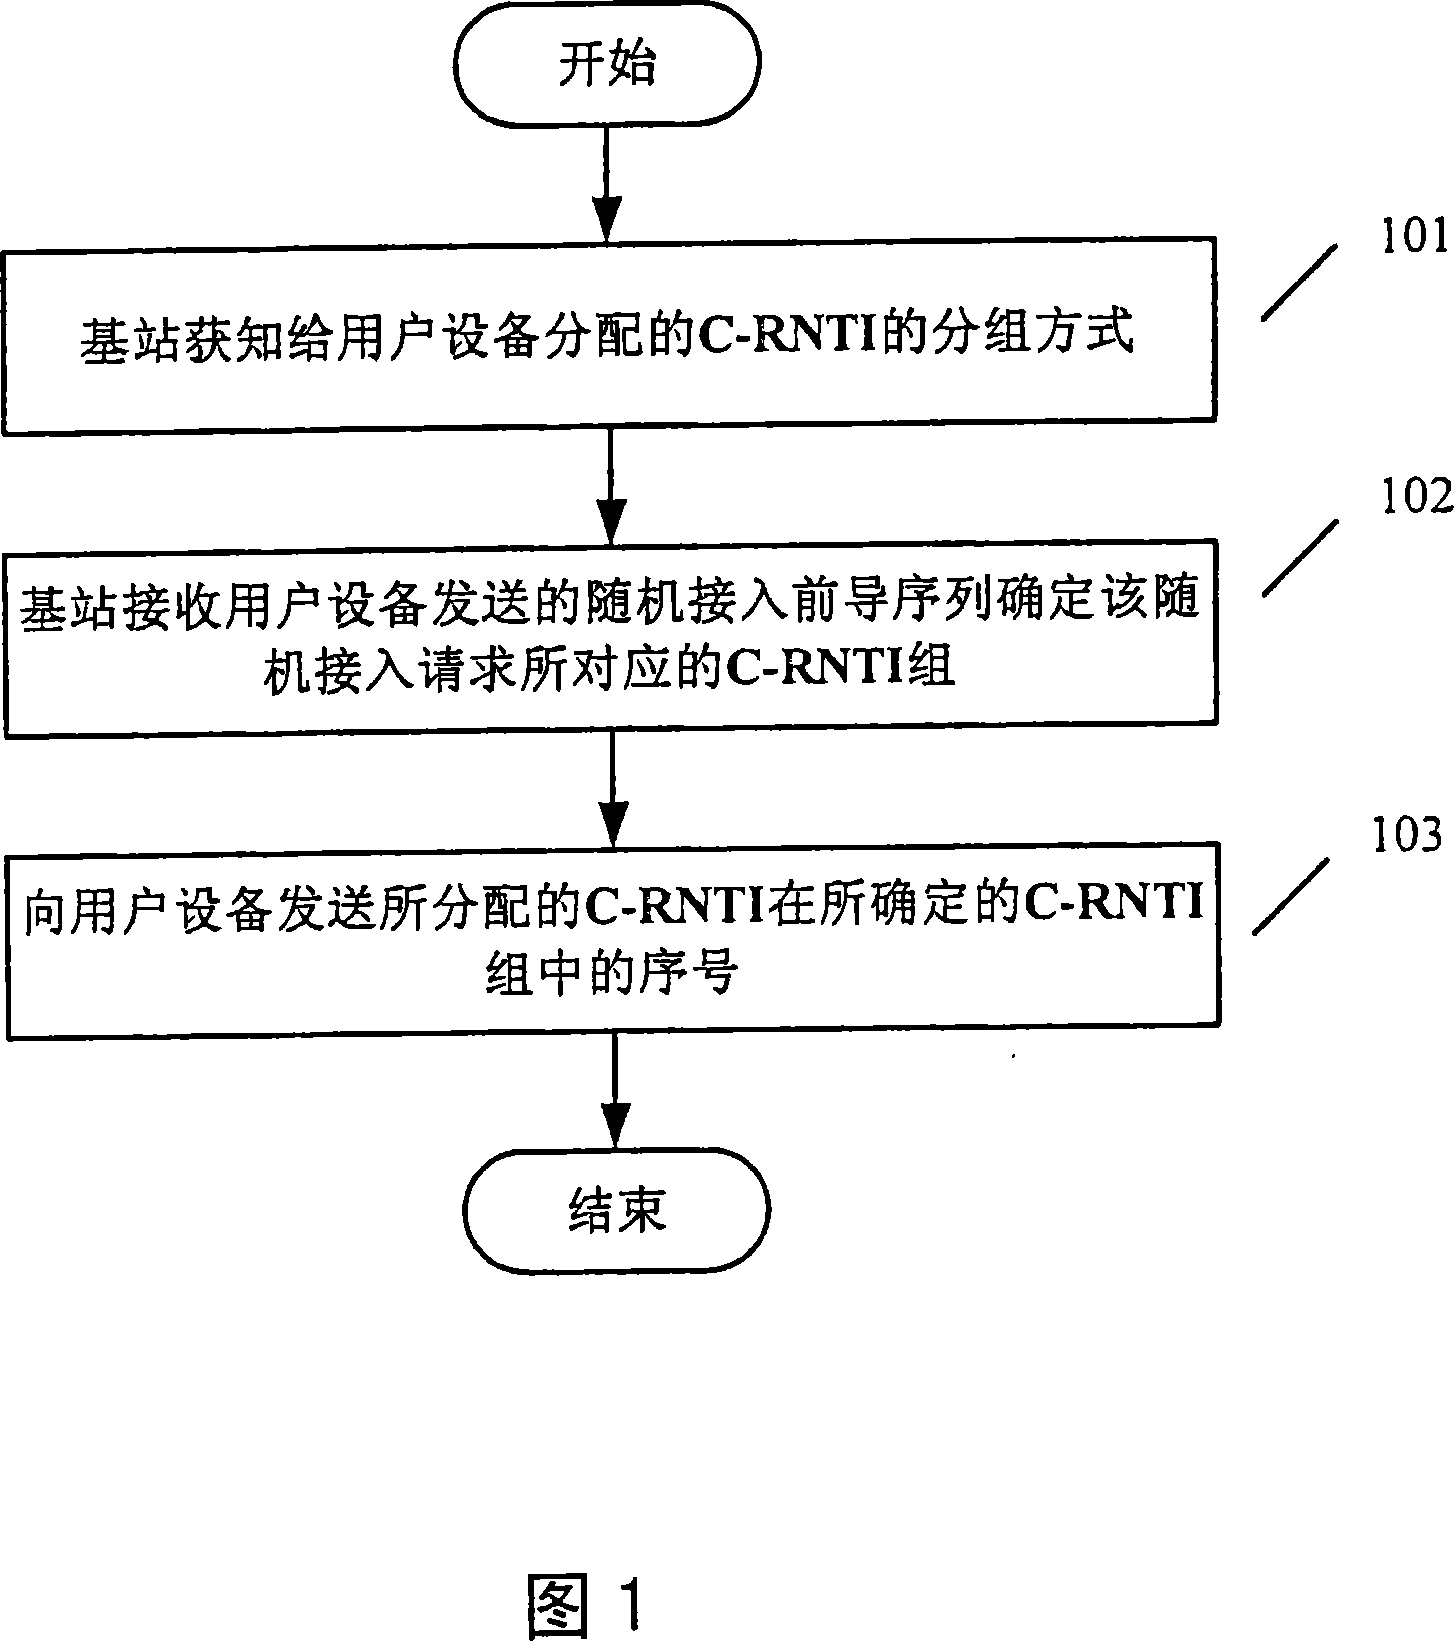 Method and device for distributing temporary recognition number of subdistrict wireless network